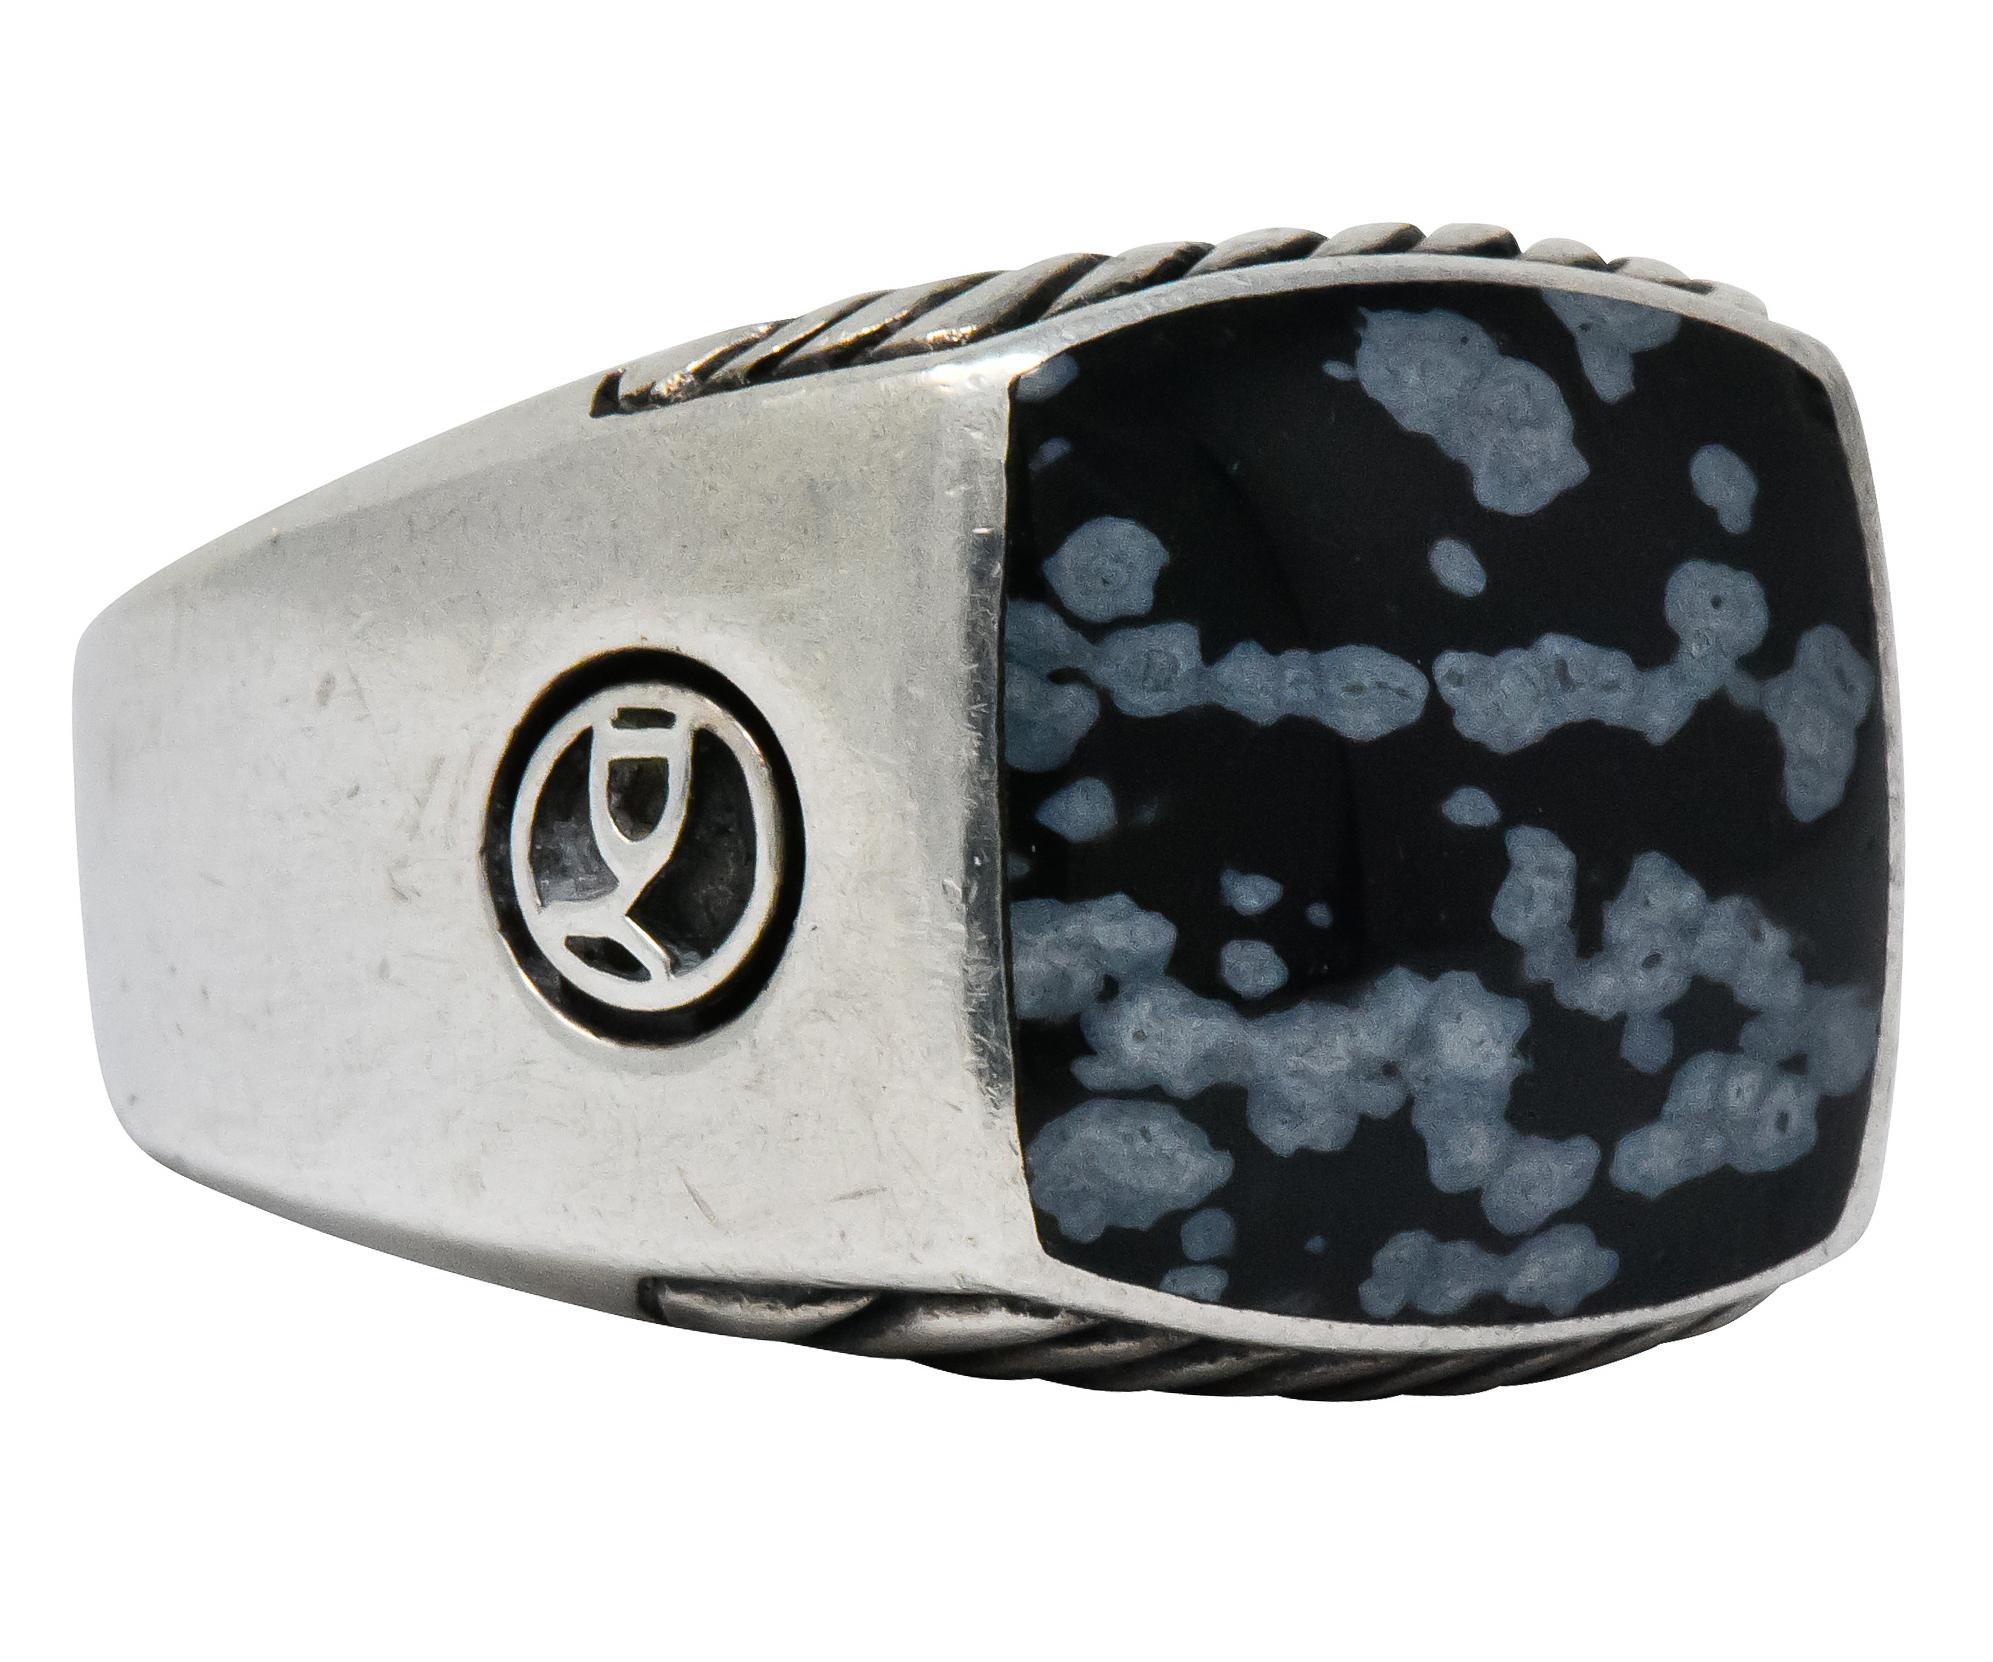 Centering an inlaid square slice of snowflake obsidian, opaque black background with white mottling and good polish

Accompanied by ribbed silver pattern on profile faces

From David Yurman's Exotic Stone collection

Silver maker's mark on